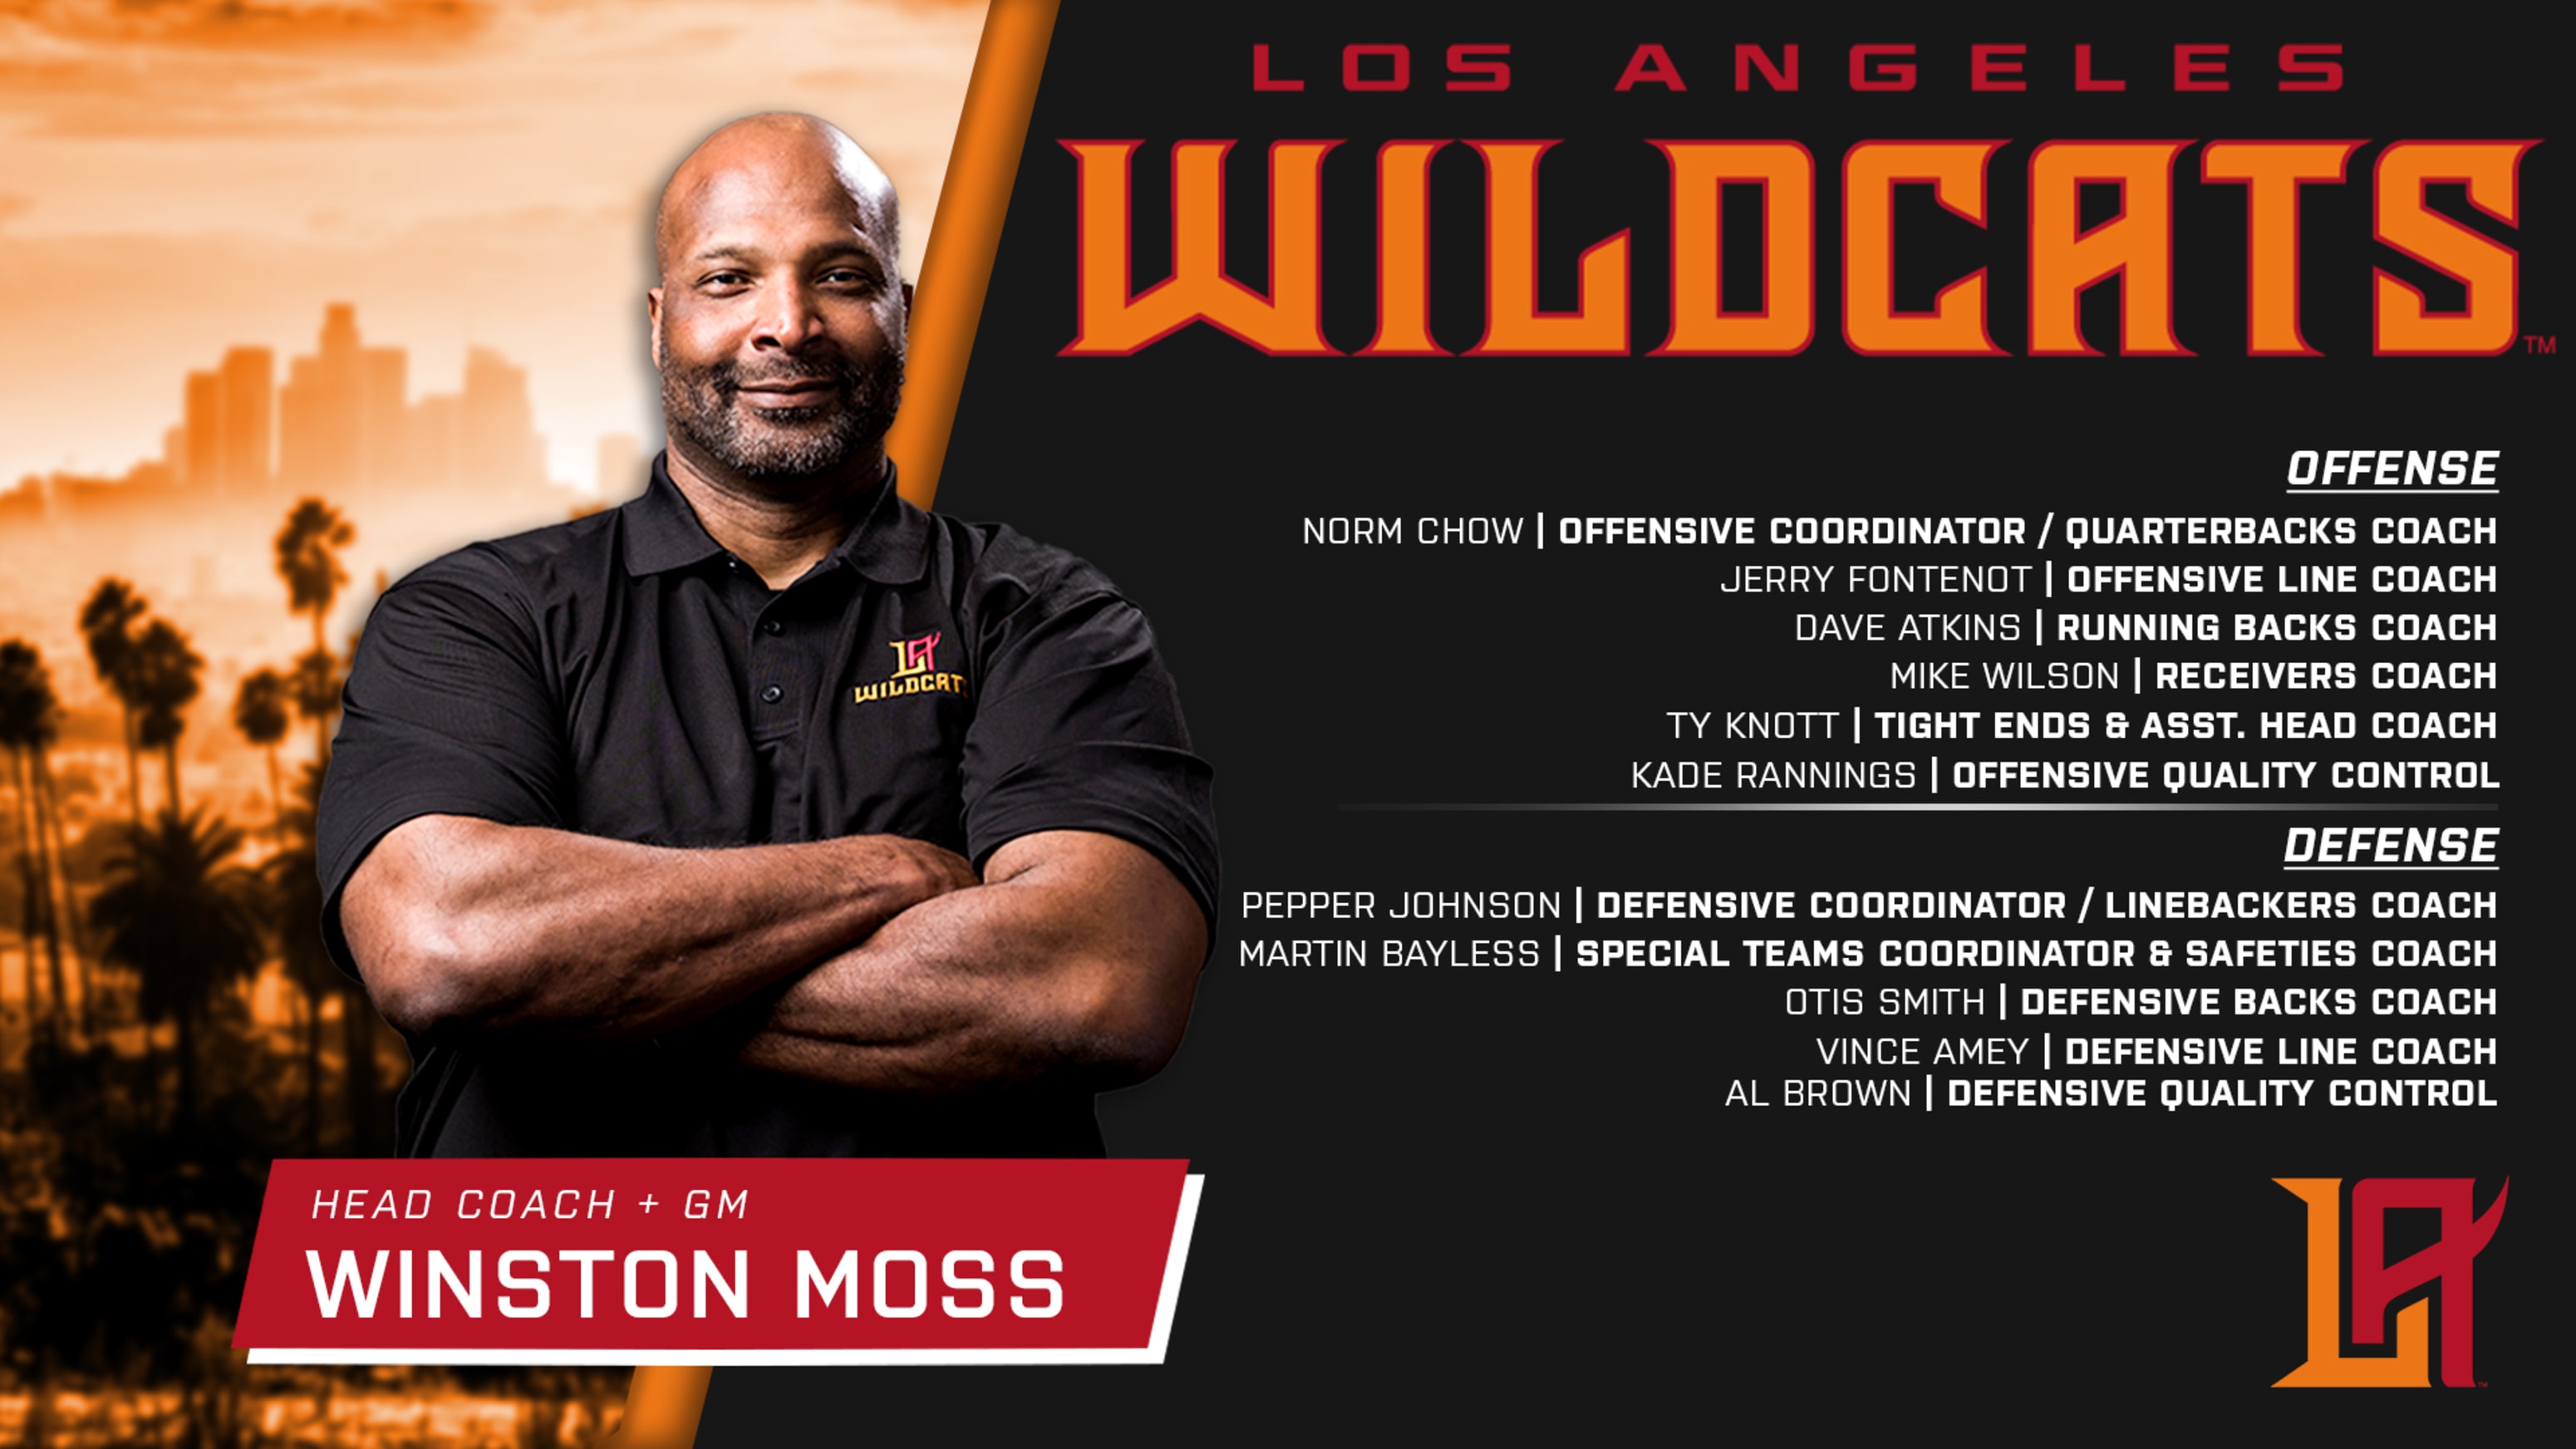 Official Los Angeles Wildcats roster, team, players and coaches